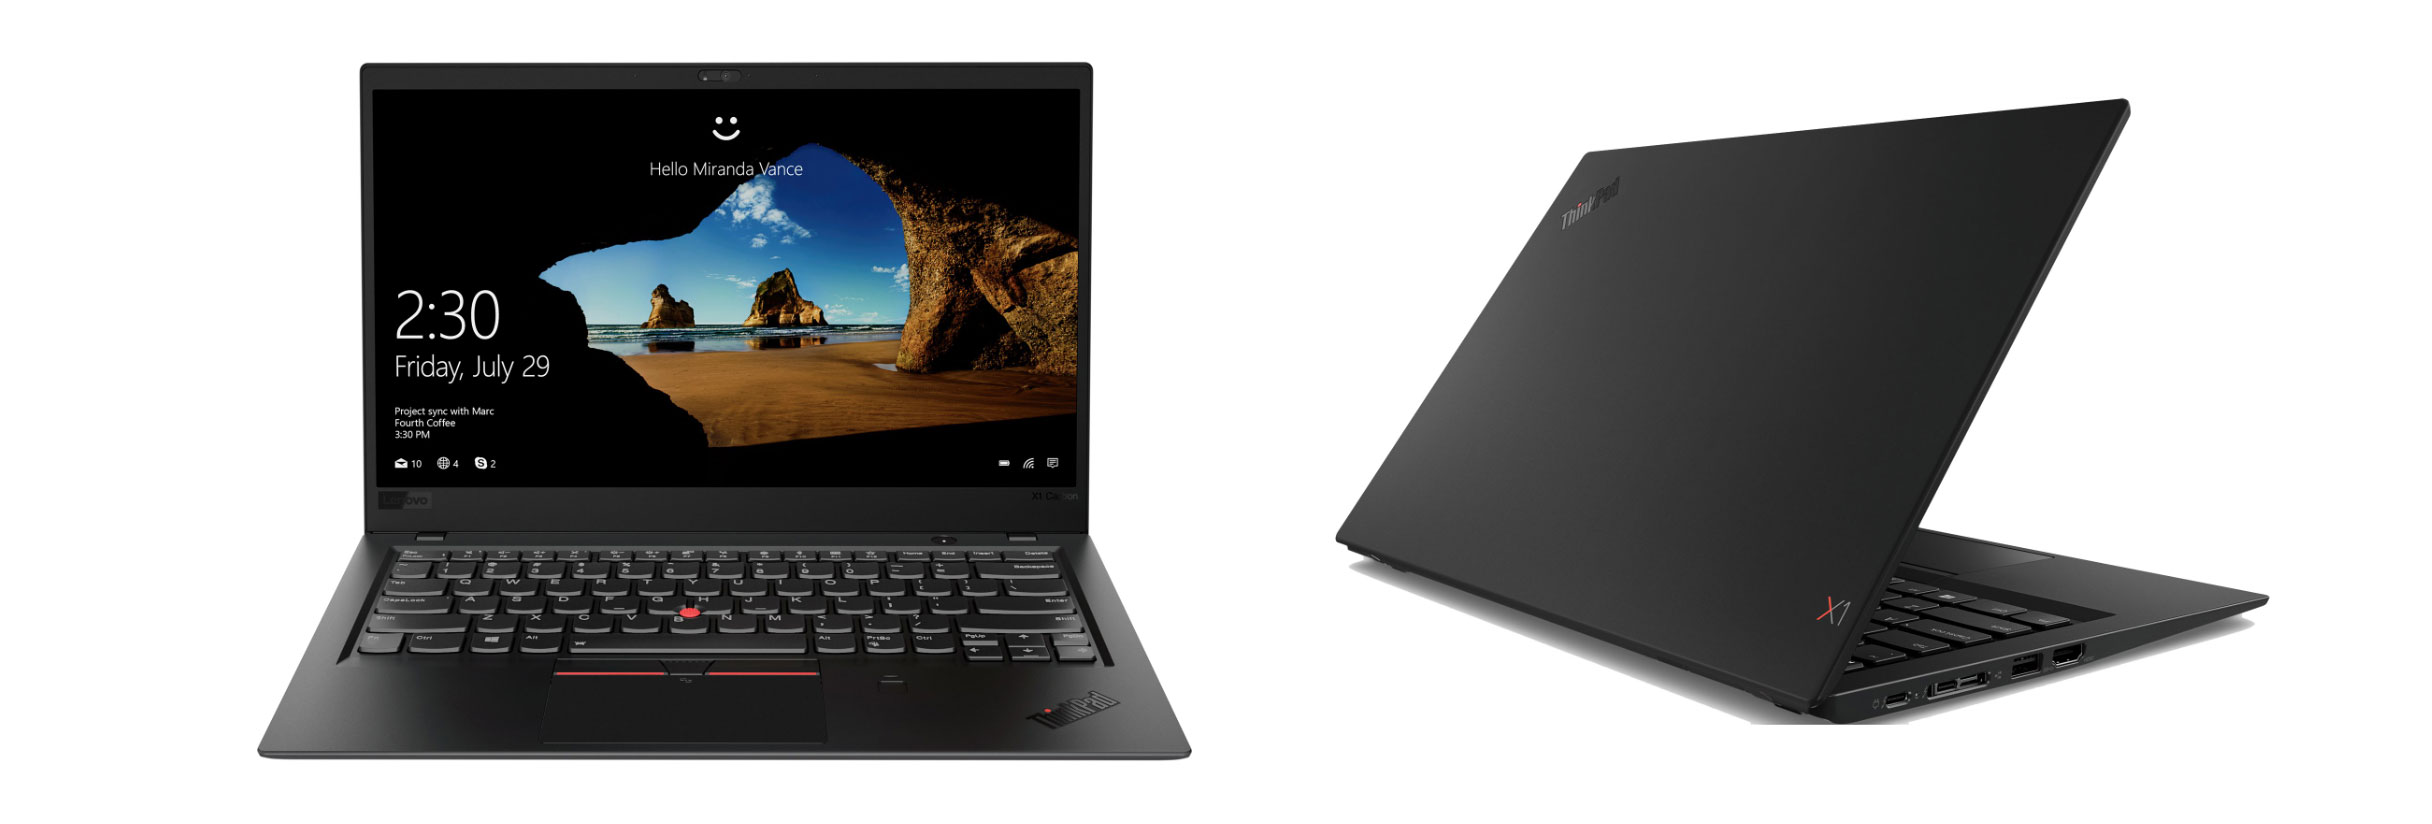 Lenovo ThinkPad X1 Carbon - lighweight and packed full of features, but expensive